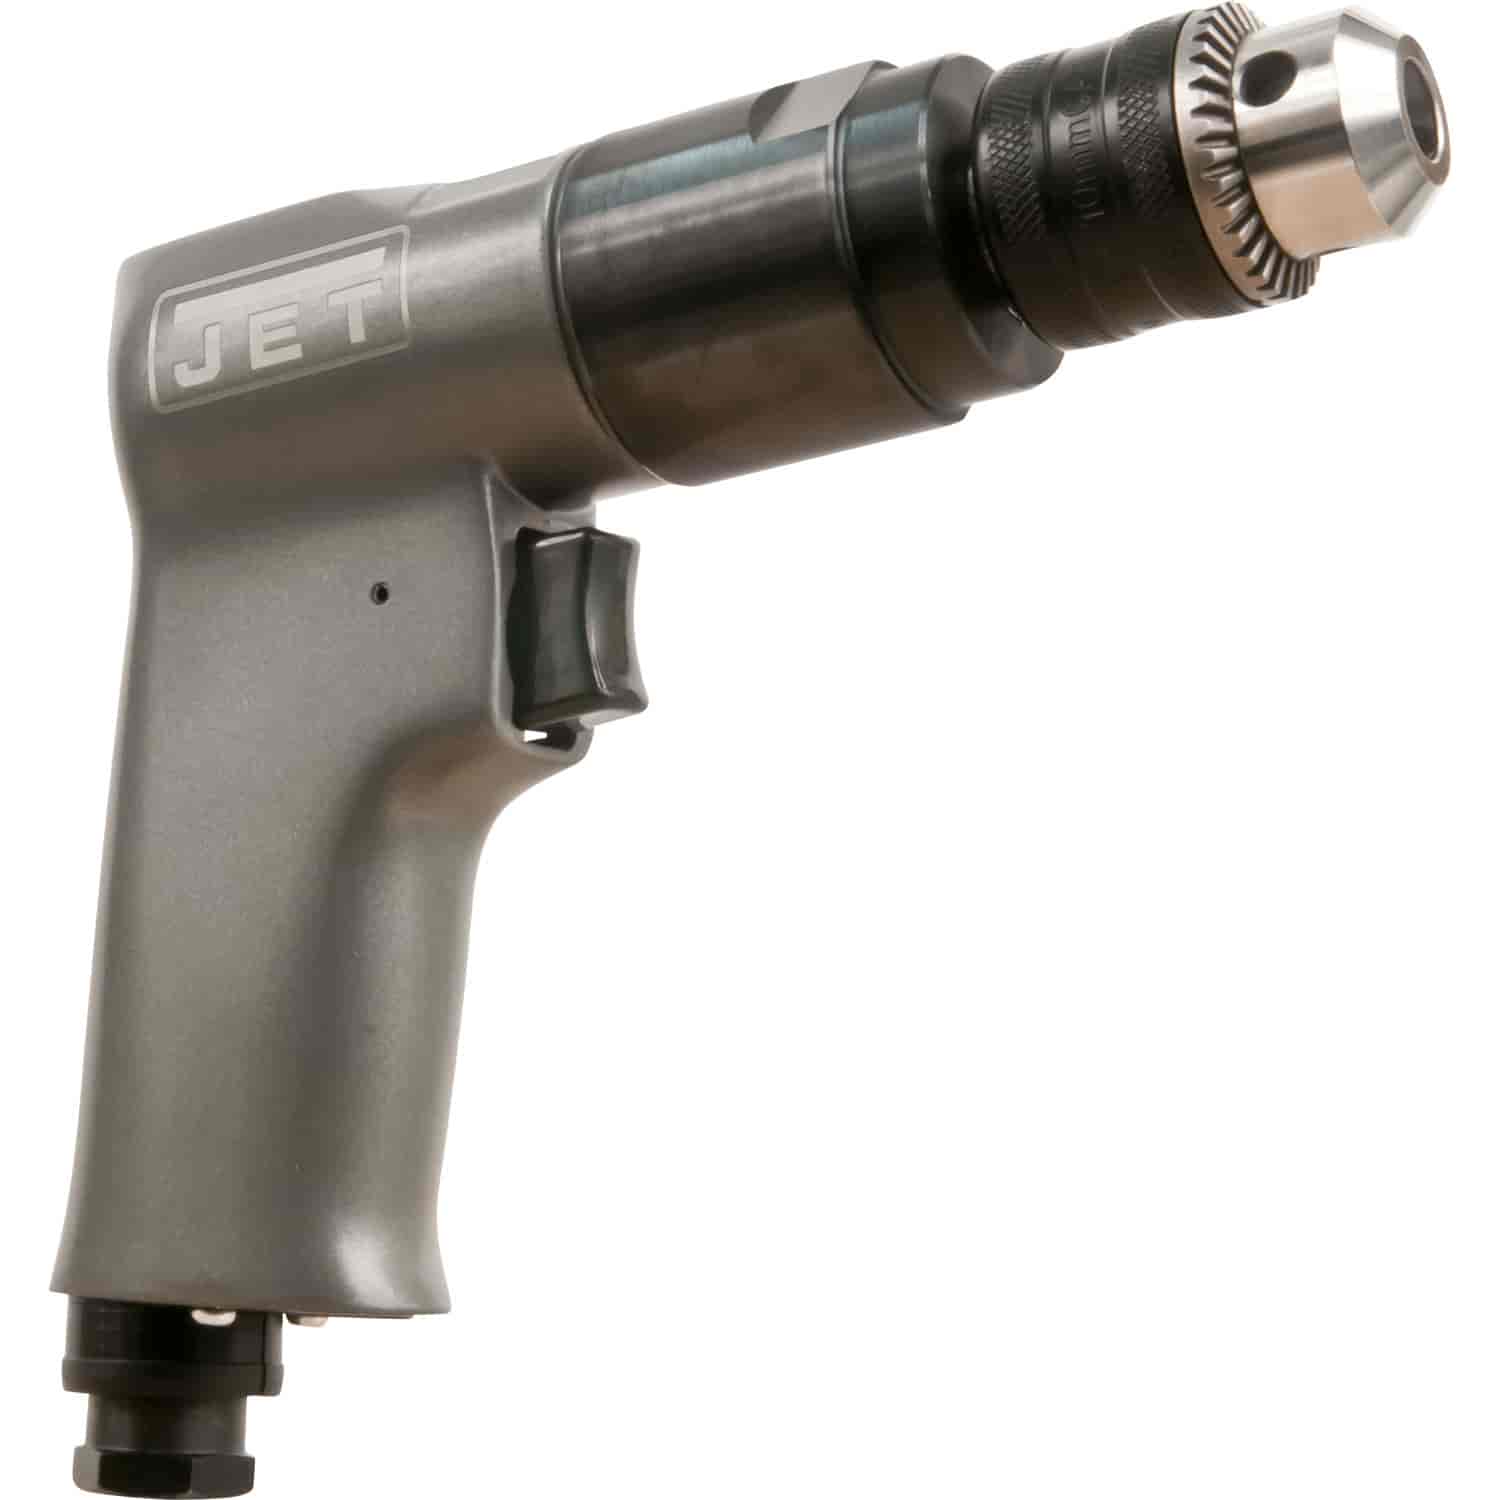 R6 3/8" Reversible Air Drill Chuck Size: 3/8"